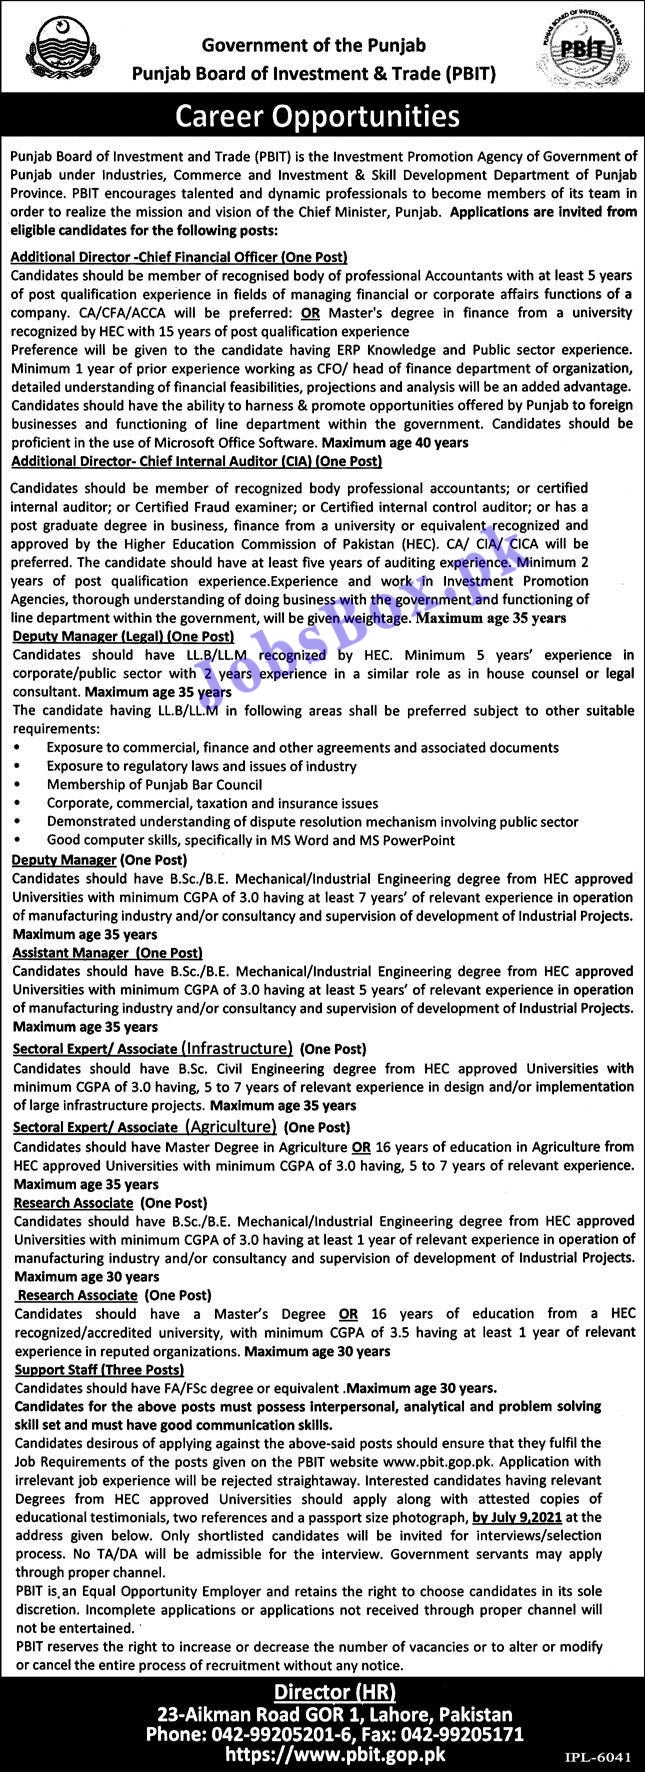 Punjab Board of Investment and Trade PBIT Jobs 2021